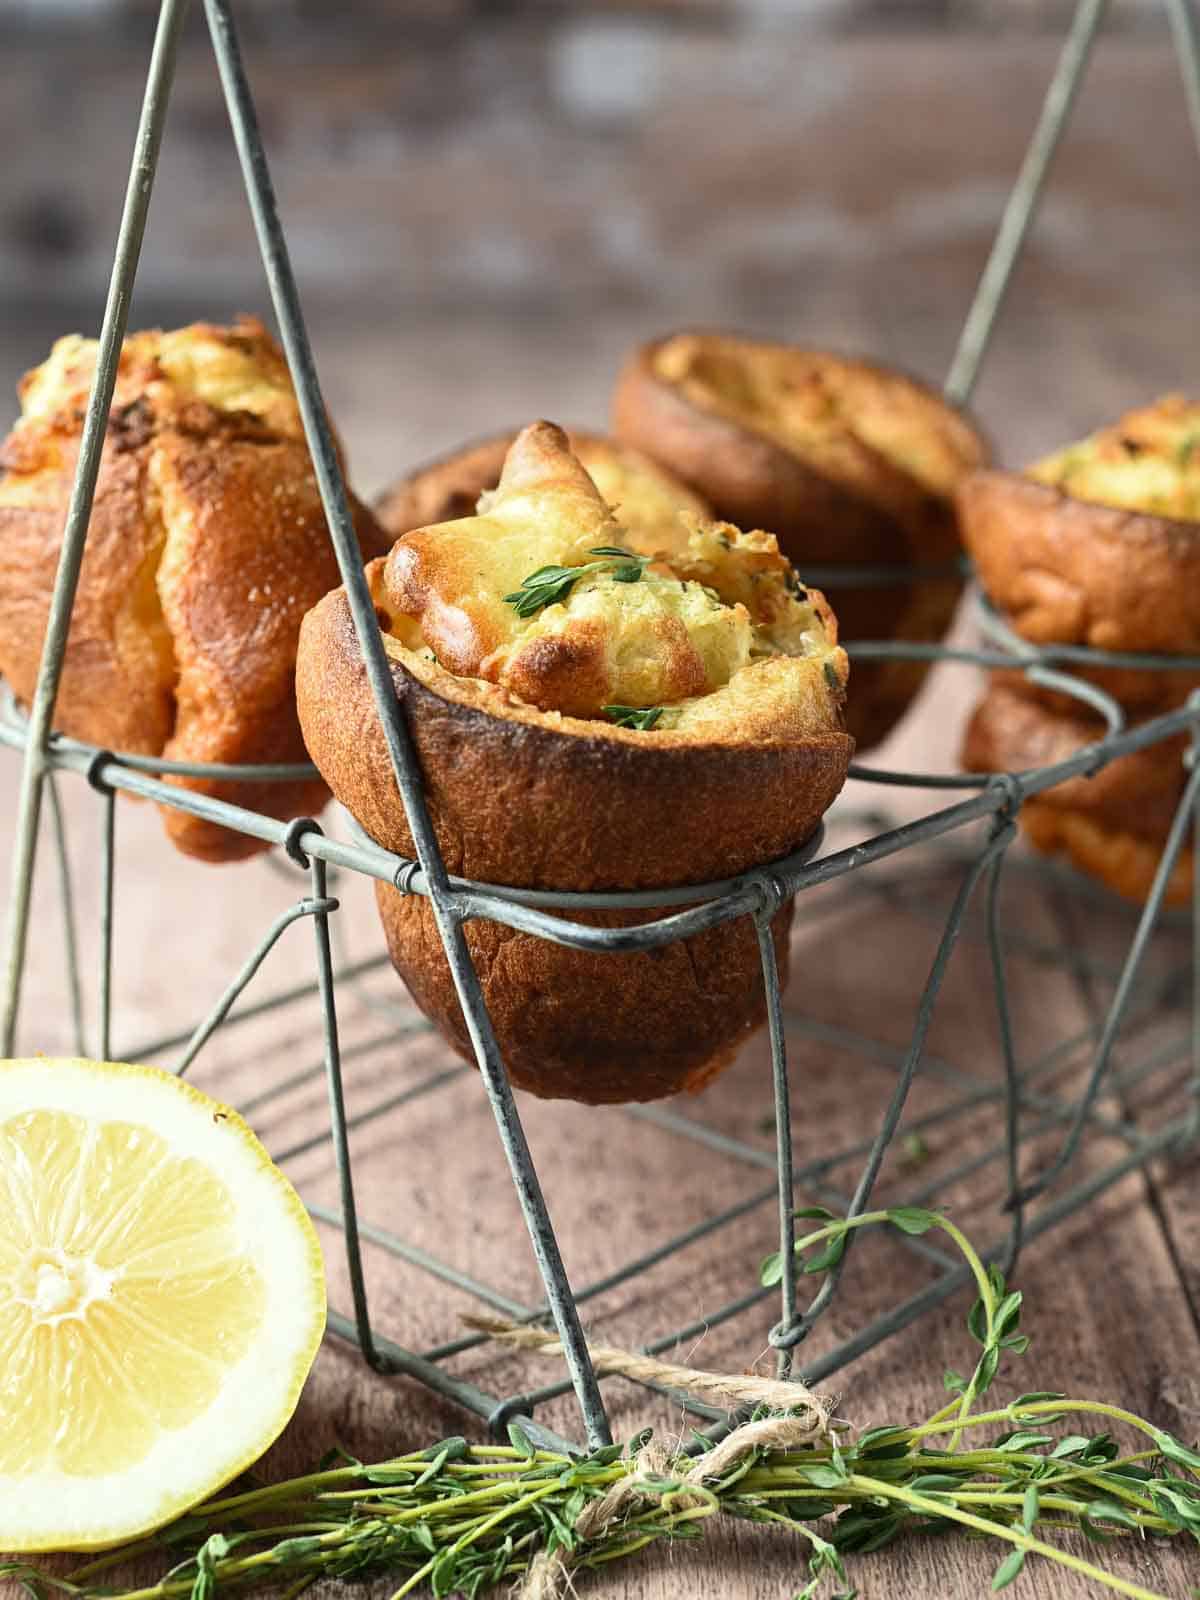 Lemon popovers are suspended in a wire rack with thyme and lemons in the forefront.